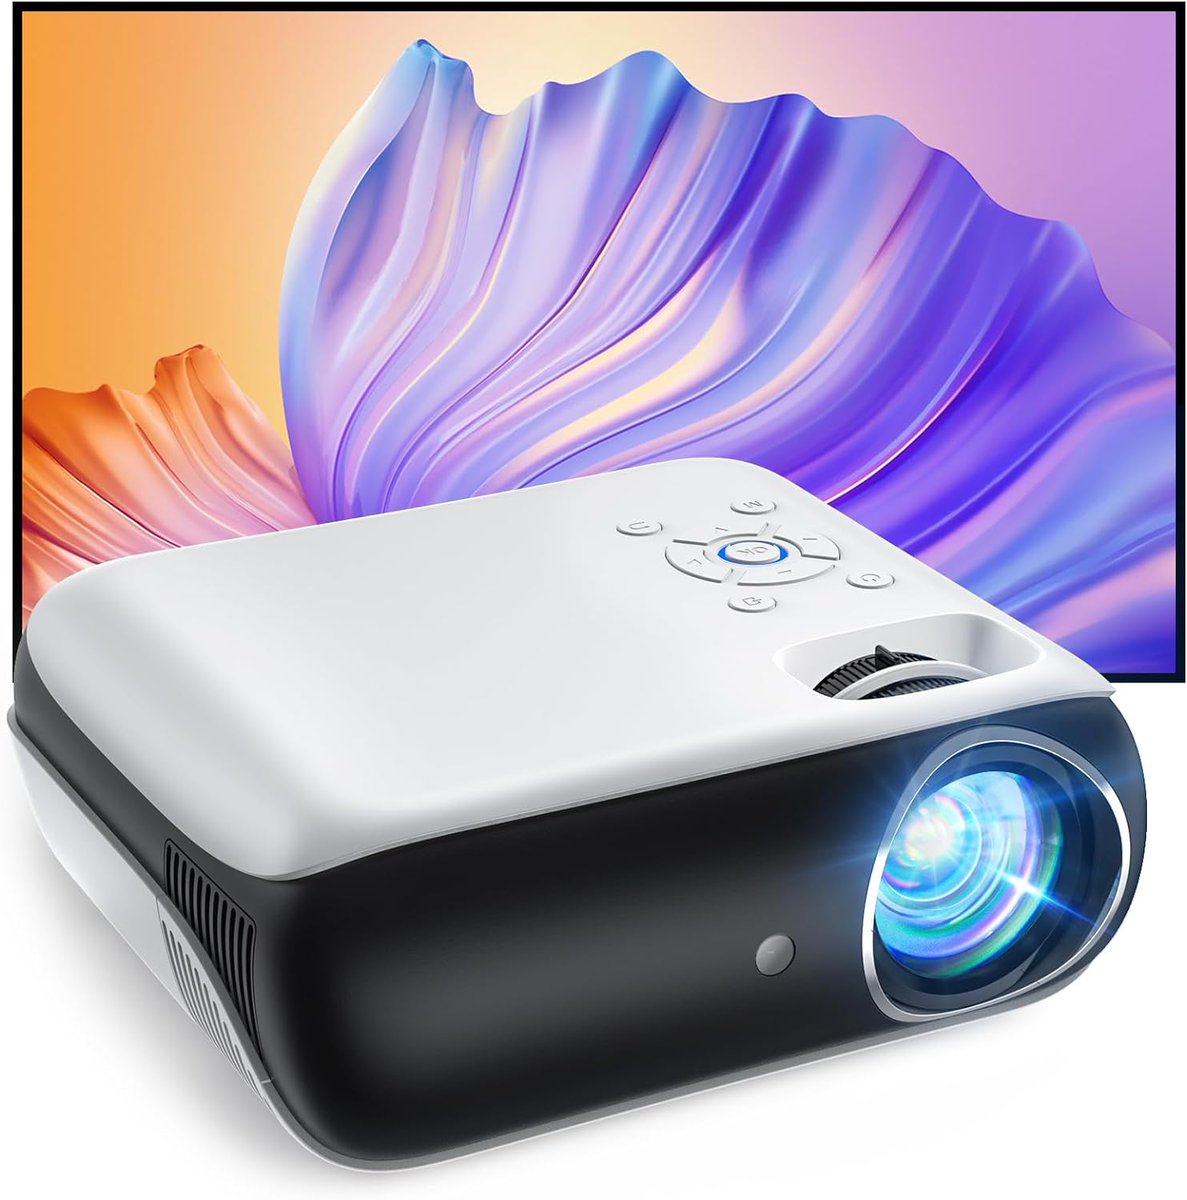 🎥 Home Theater Upgrade: Native 1080P Bluetooth Projector with 100' Screen Now $69.99 (Orig. $119.99) 💰 Deal Price: $69.99 💸 Regular Price: $119.99 🔗 amzn.to/3UKRAxR #HomeTheater #BluetoothProjector #TechDeals #ProjectorScreen